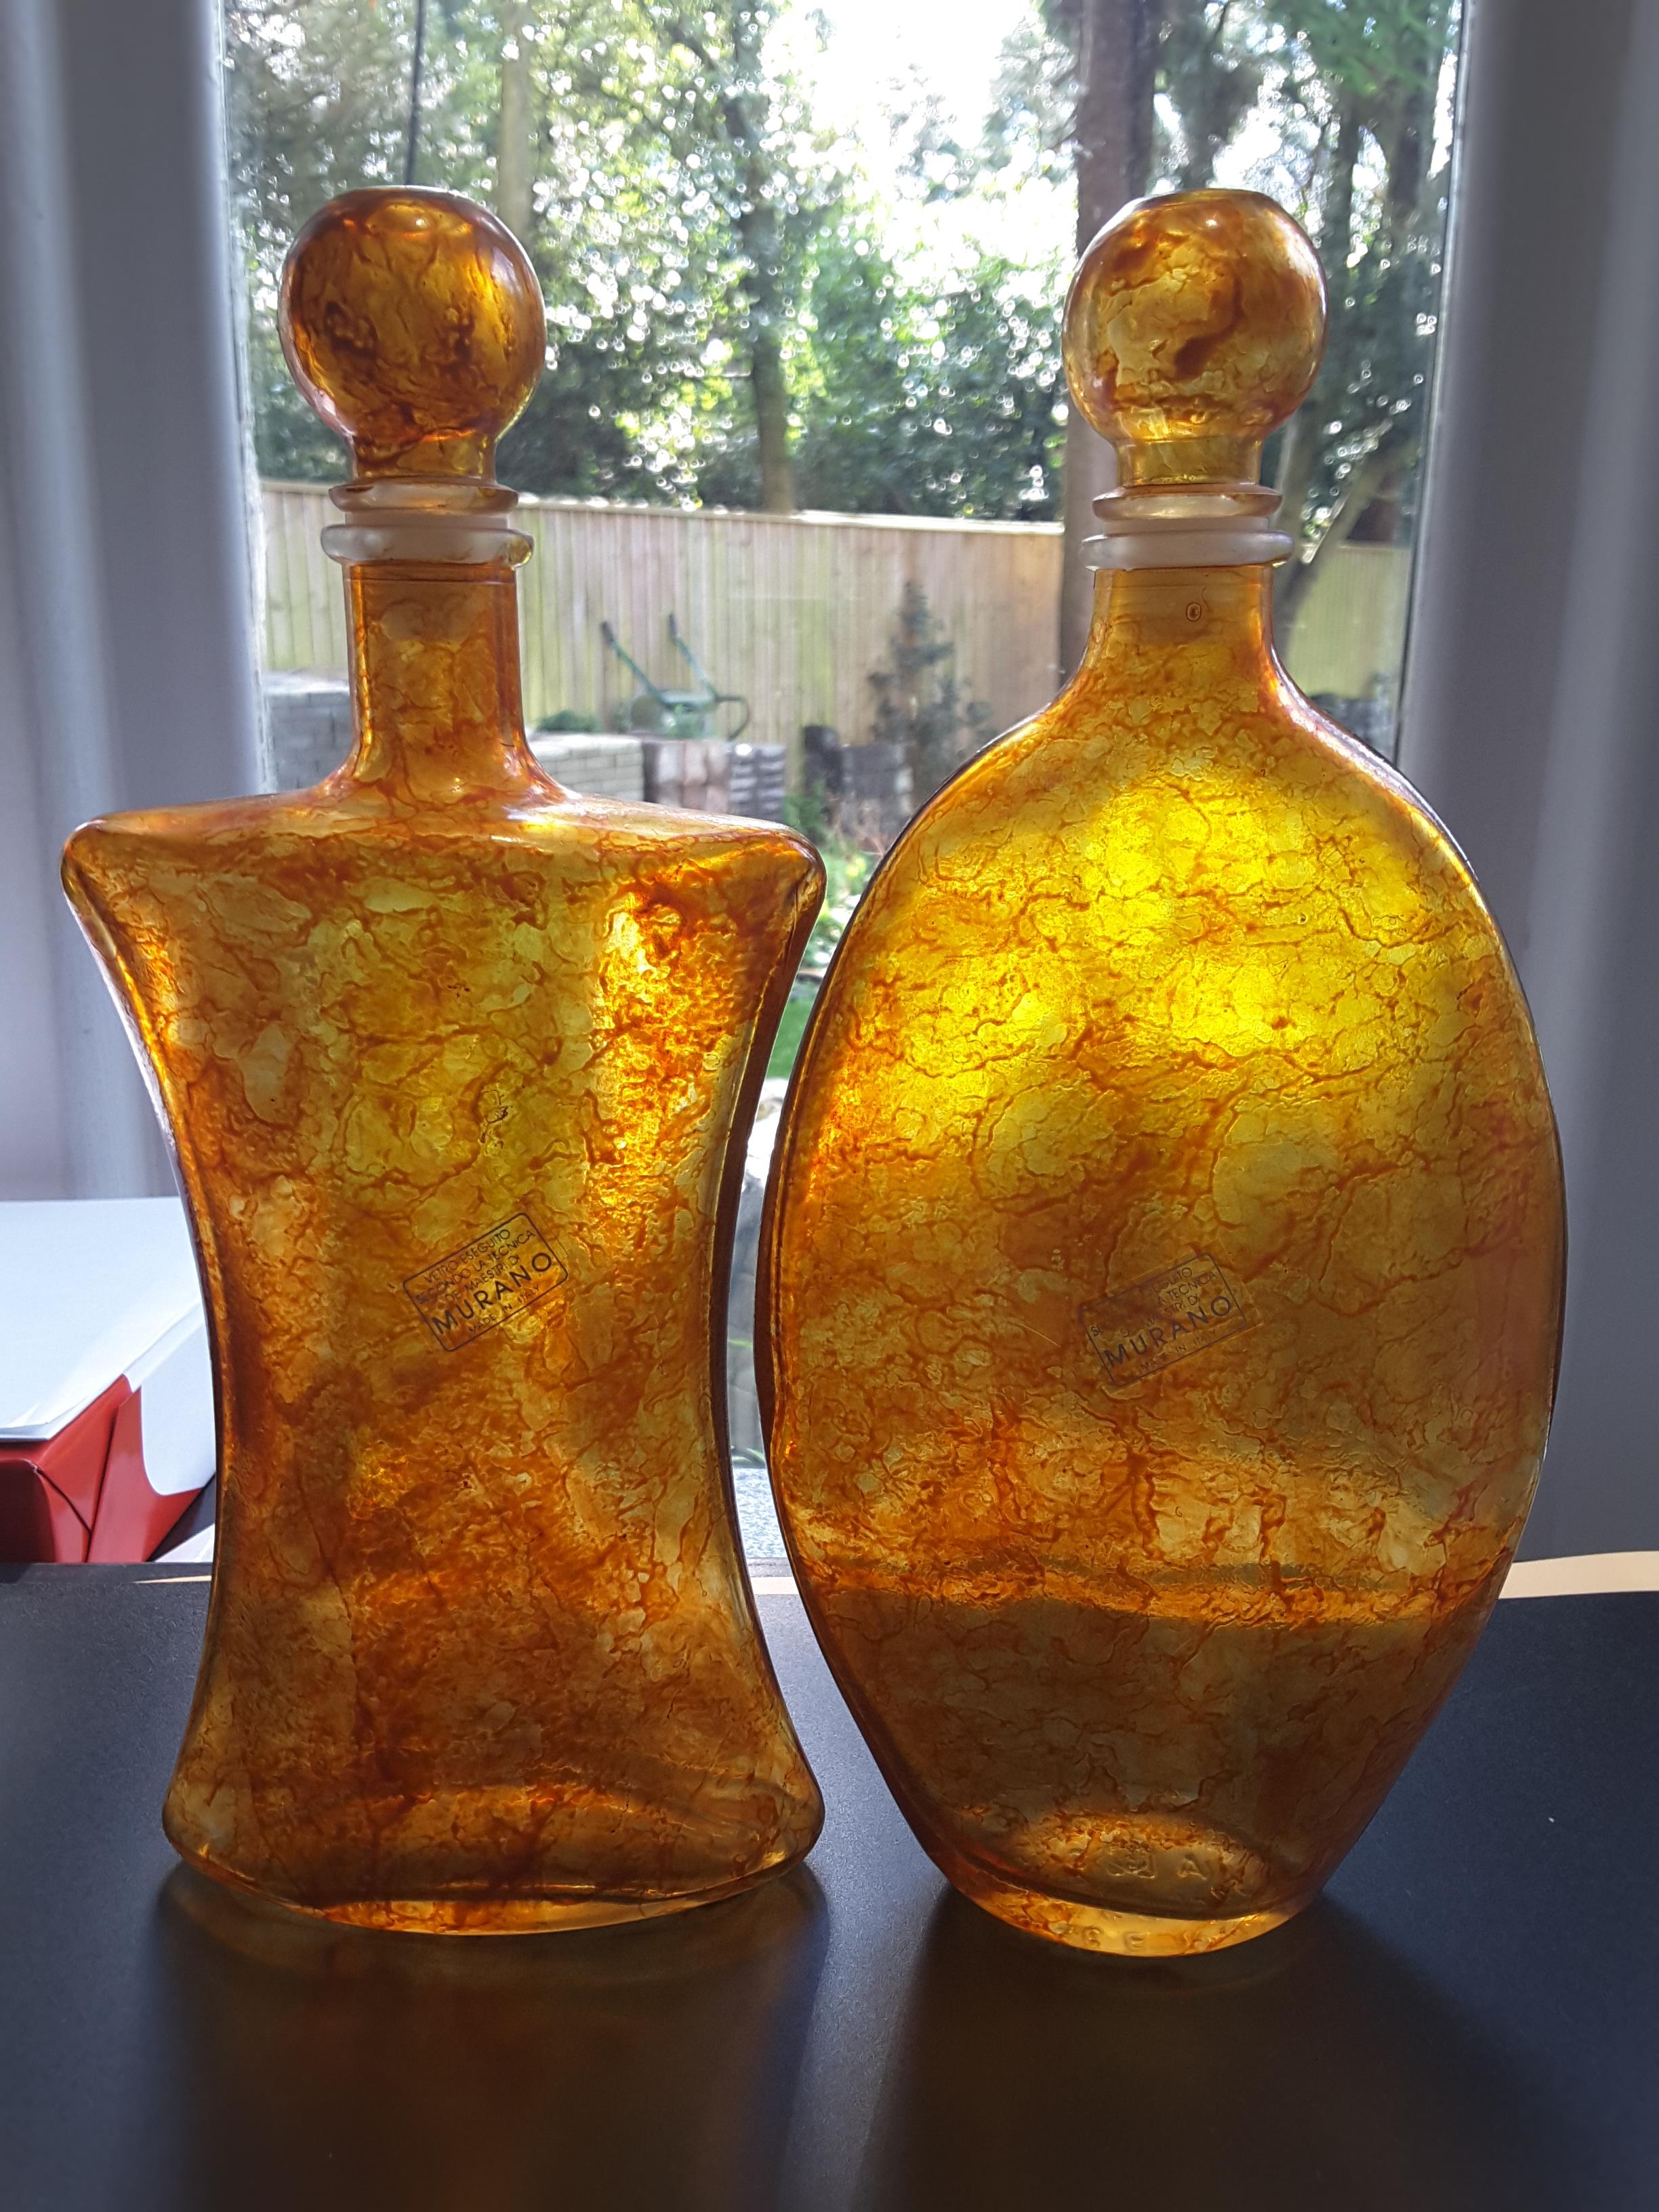 A Pair Of Murano Glass Decanters - Image 6 of 6